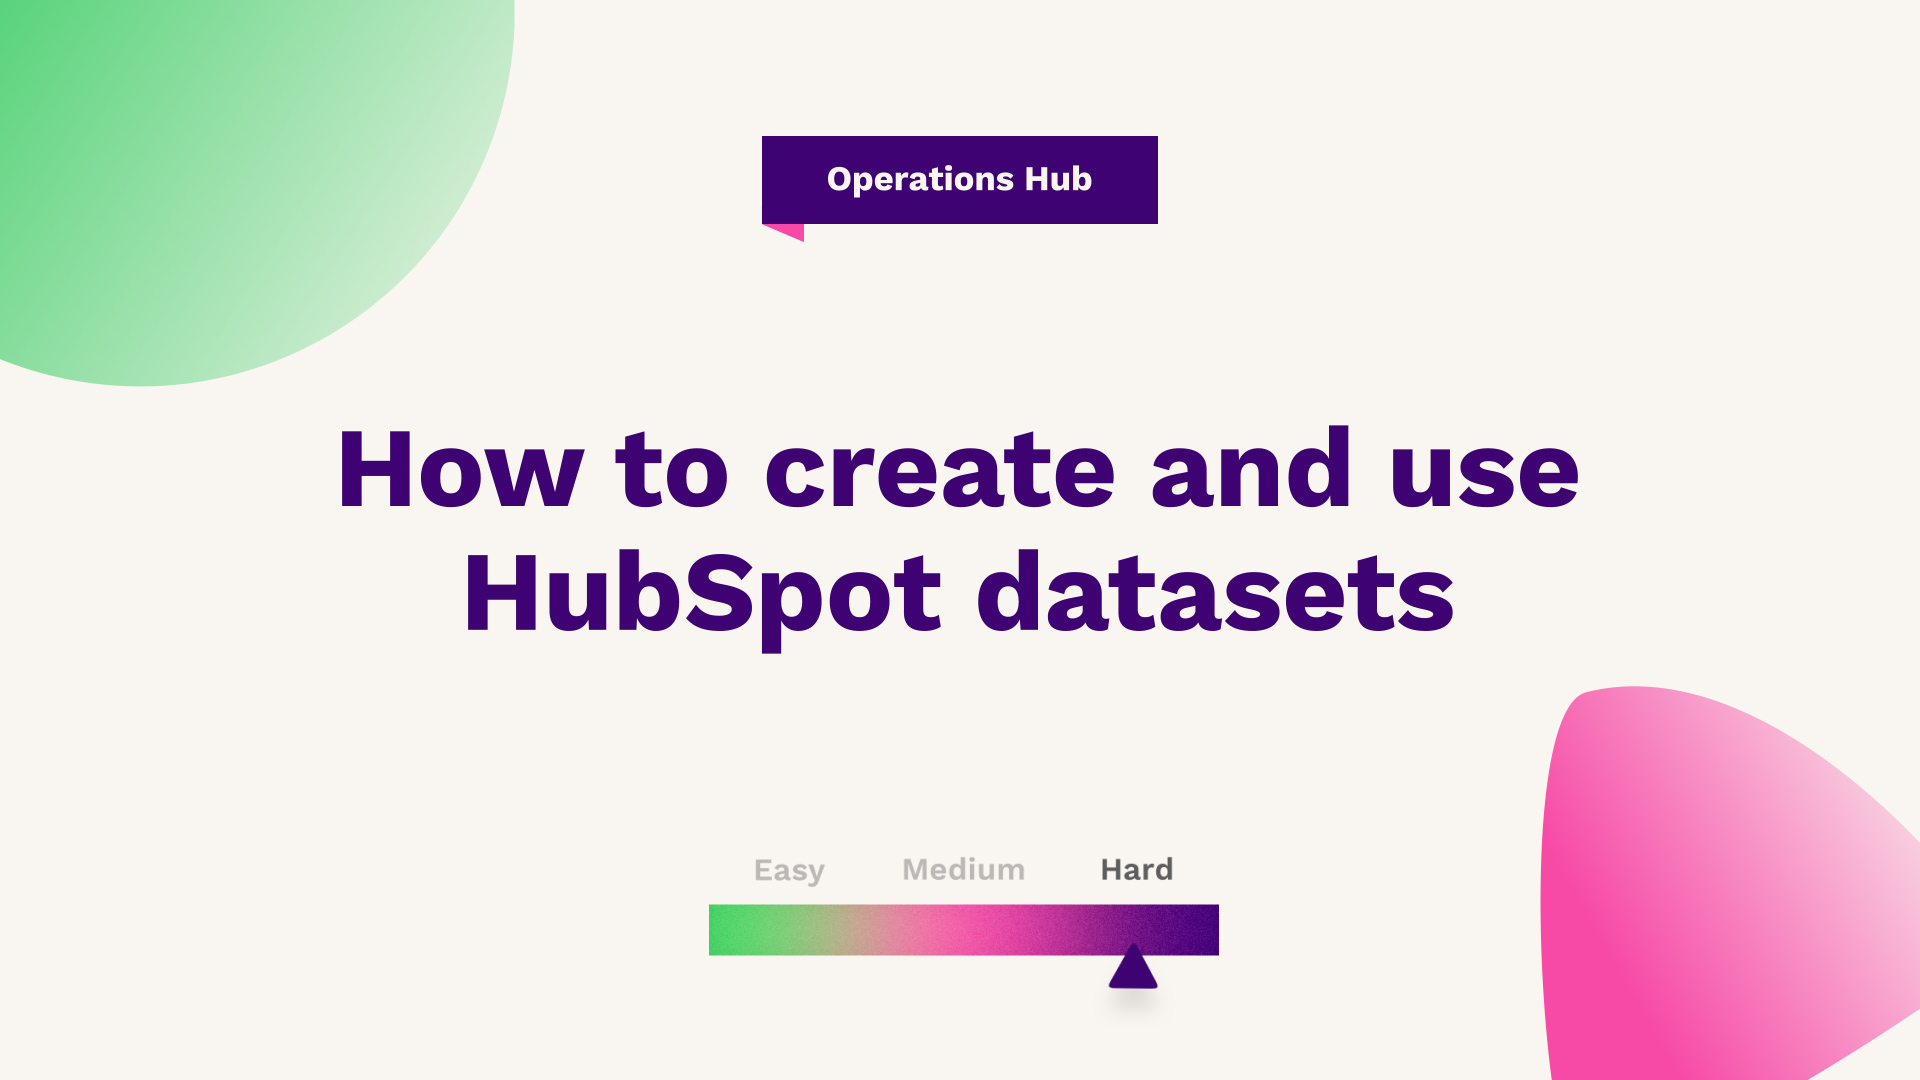 How to create and use HubSpot datasets